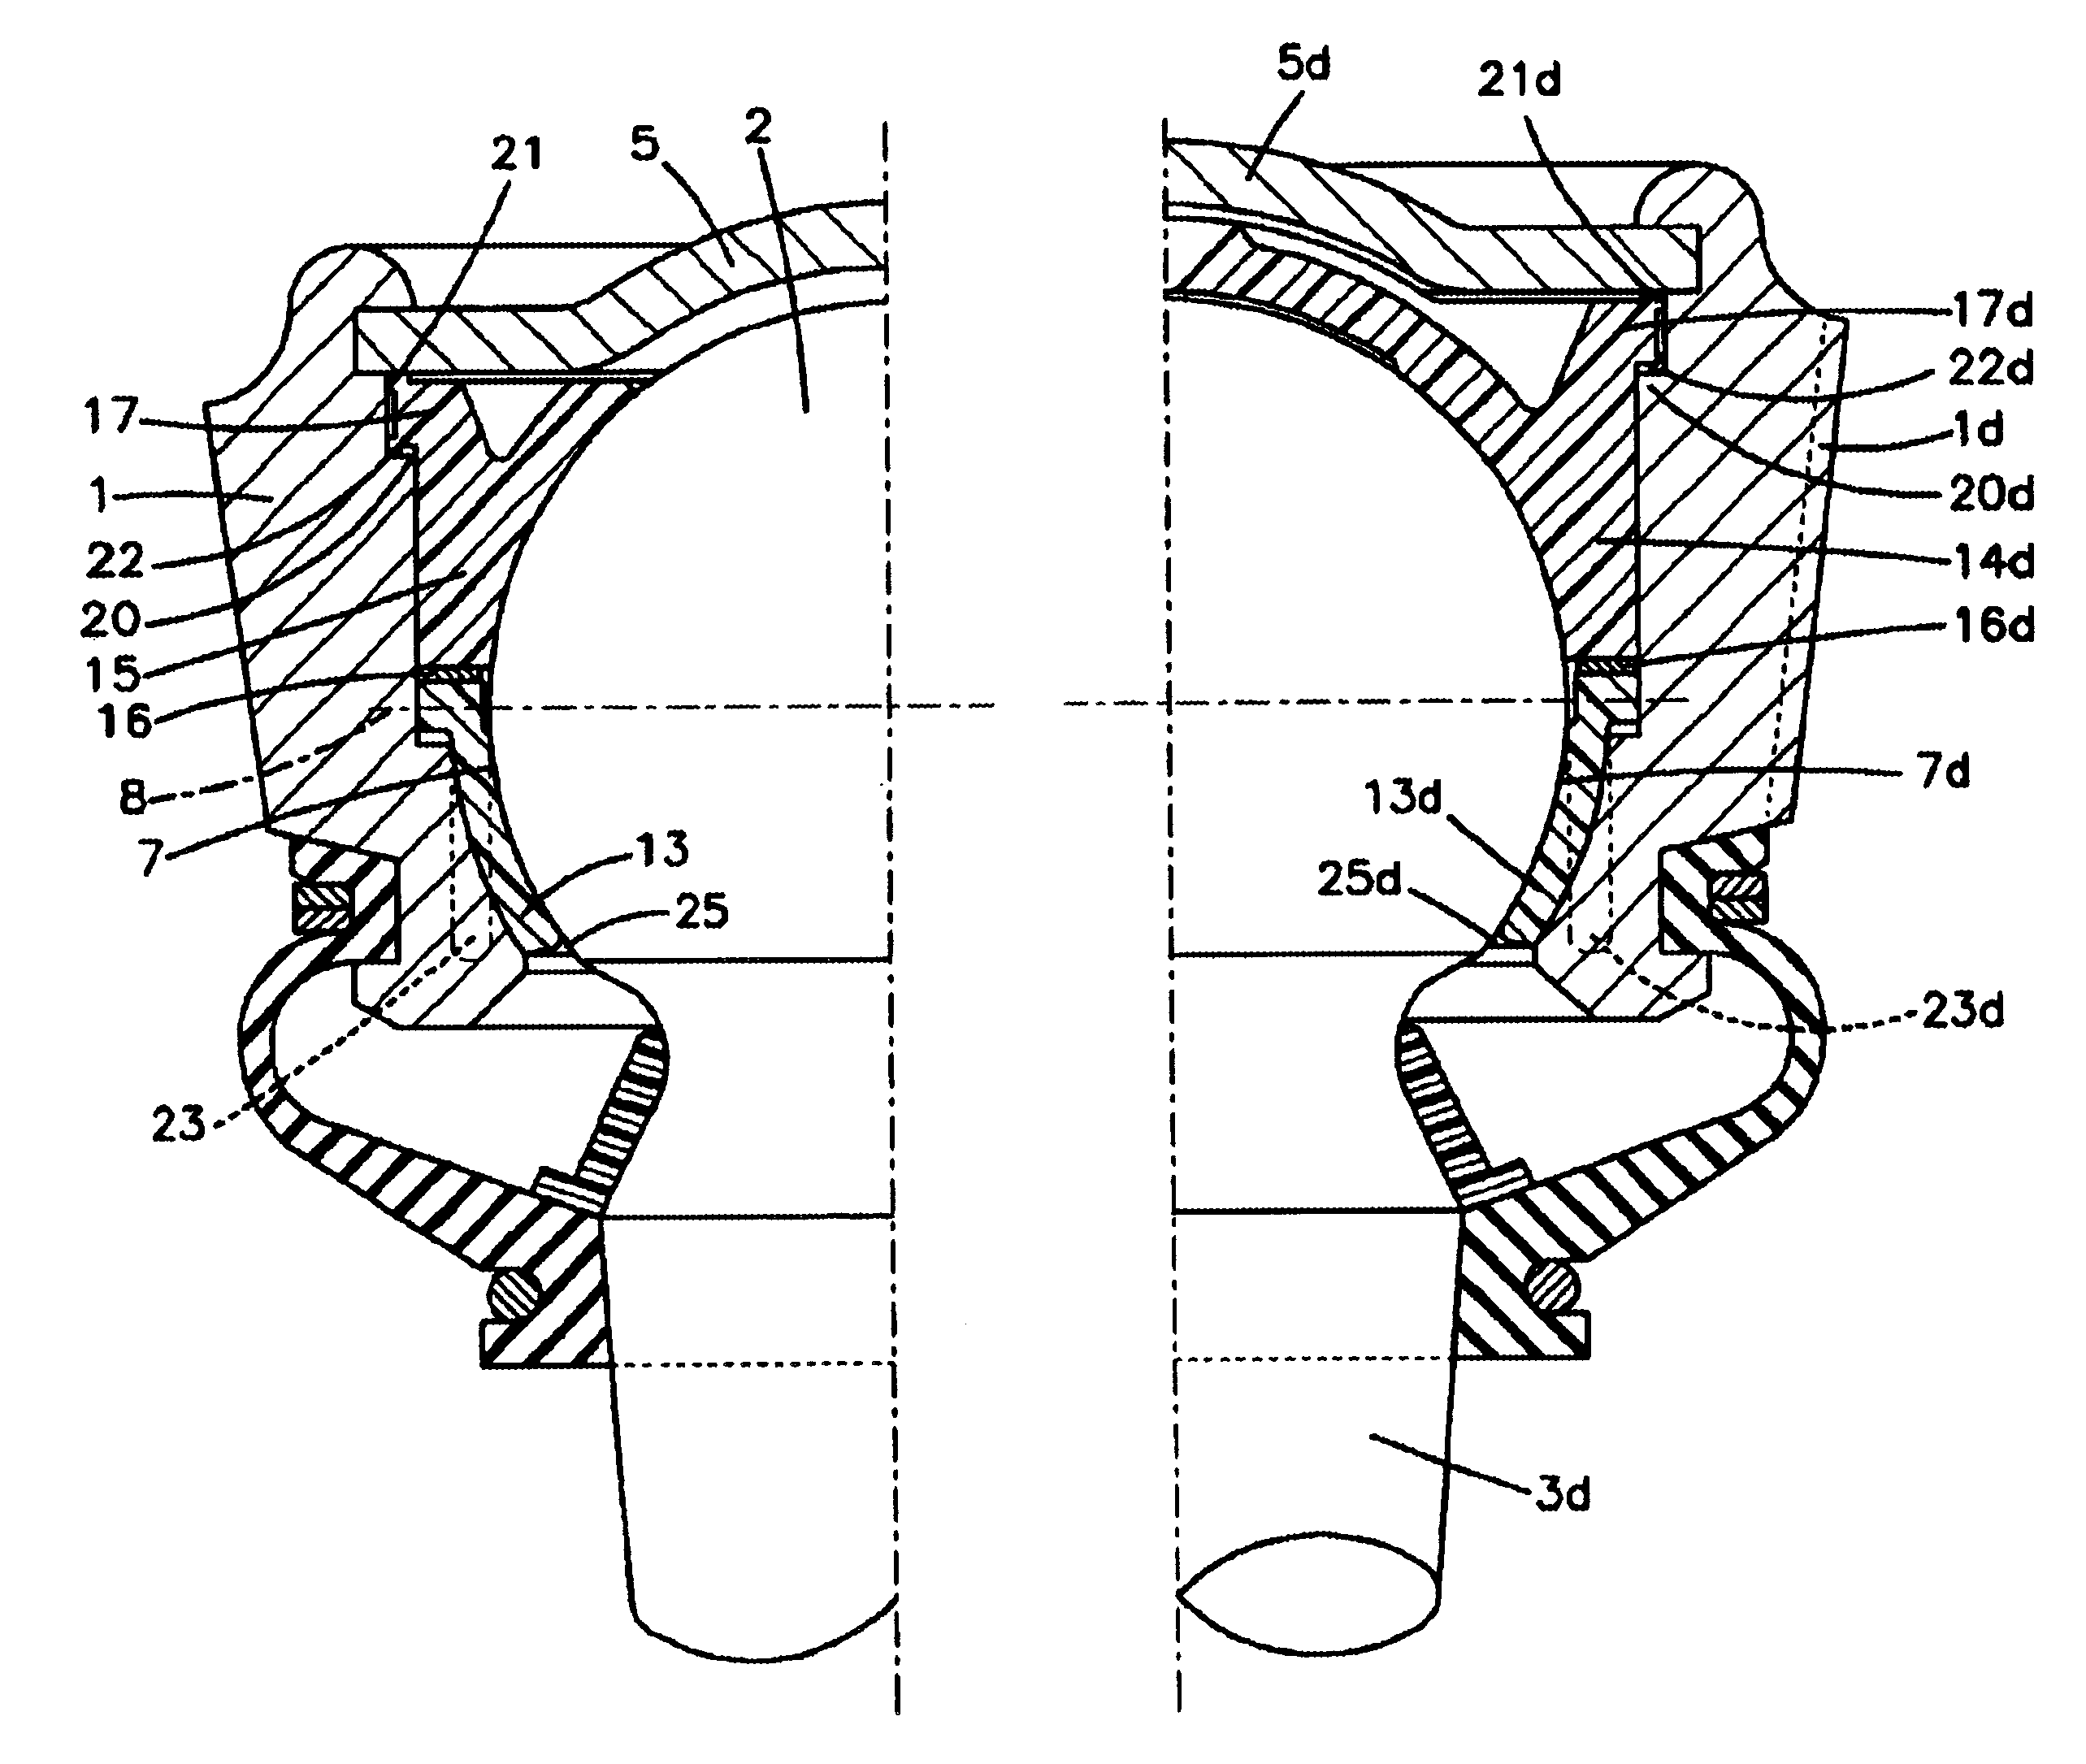 Ball-and-socket joint with bearing shell